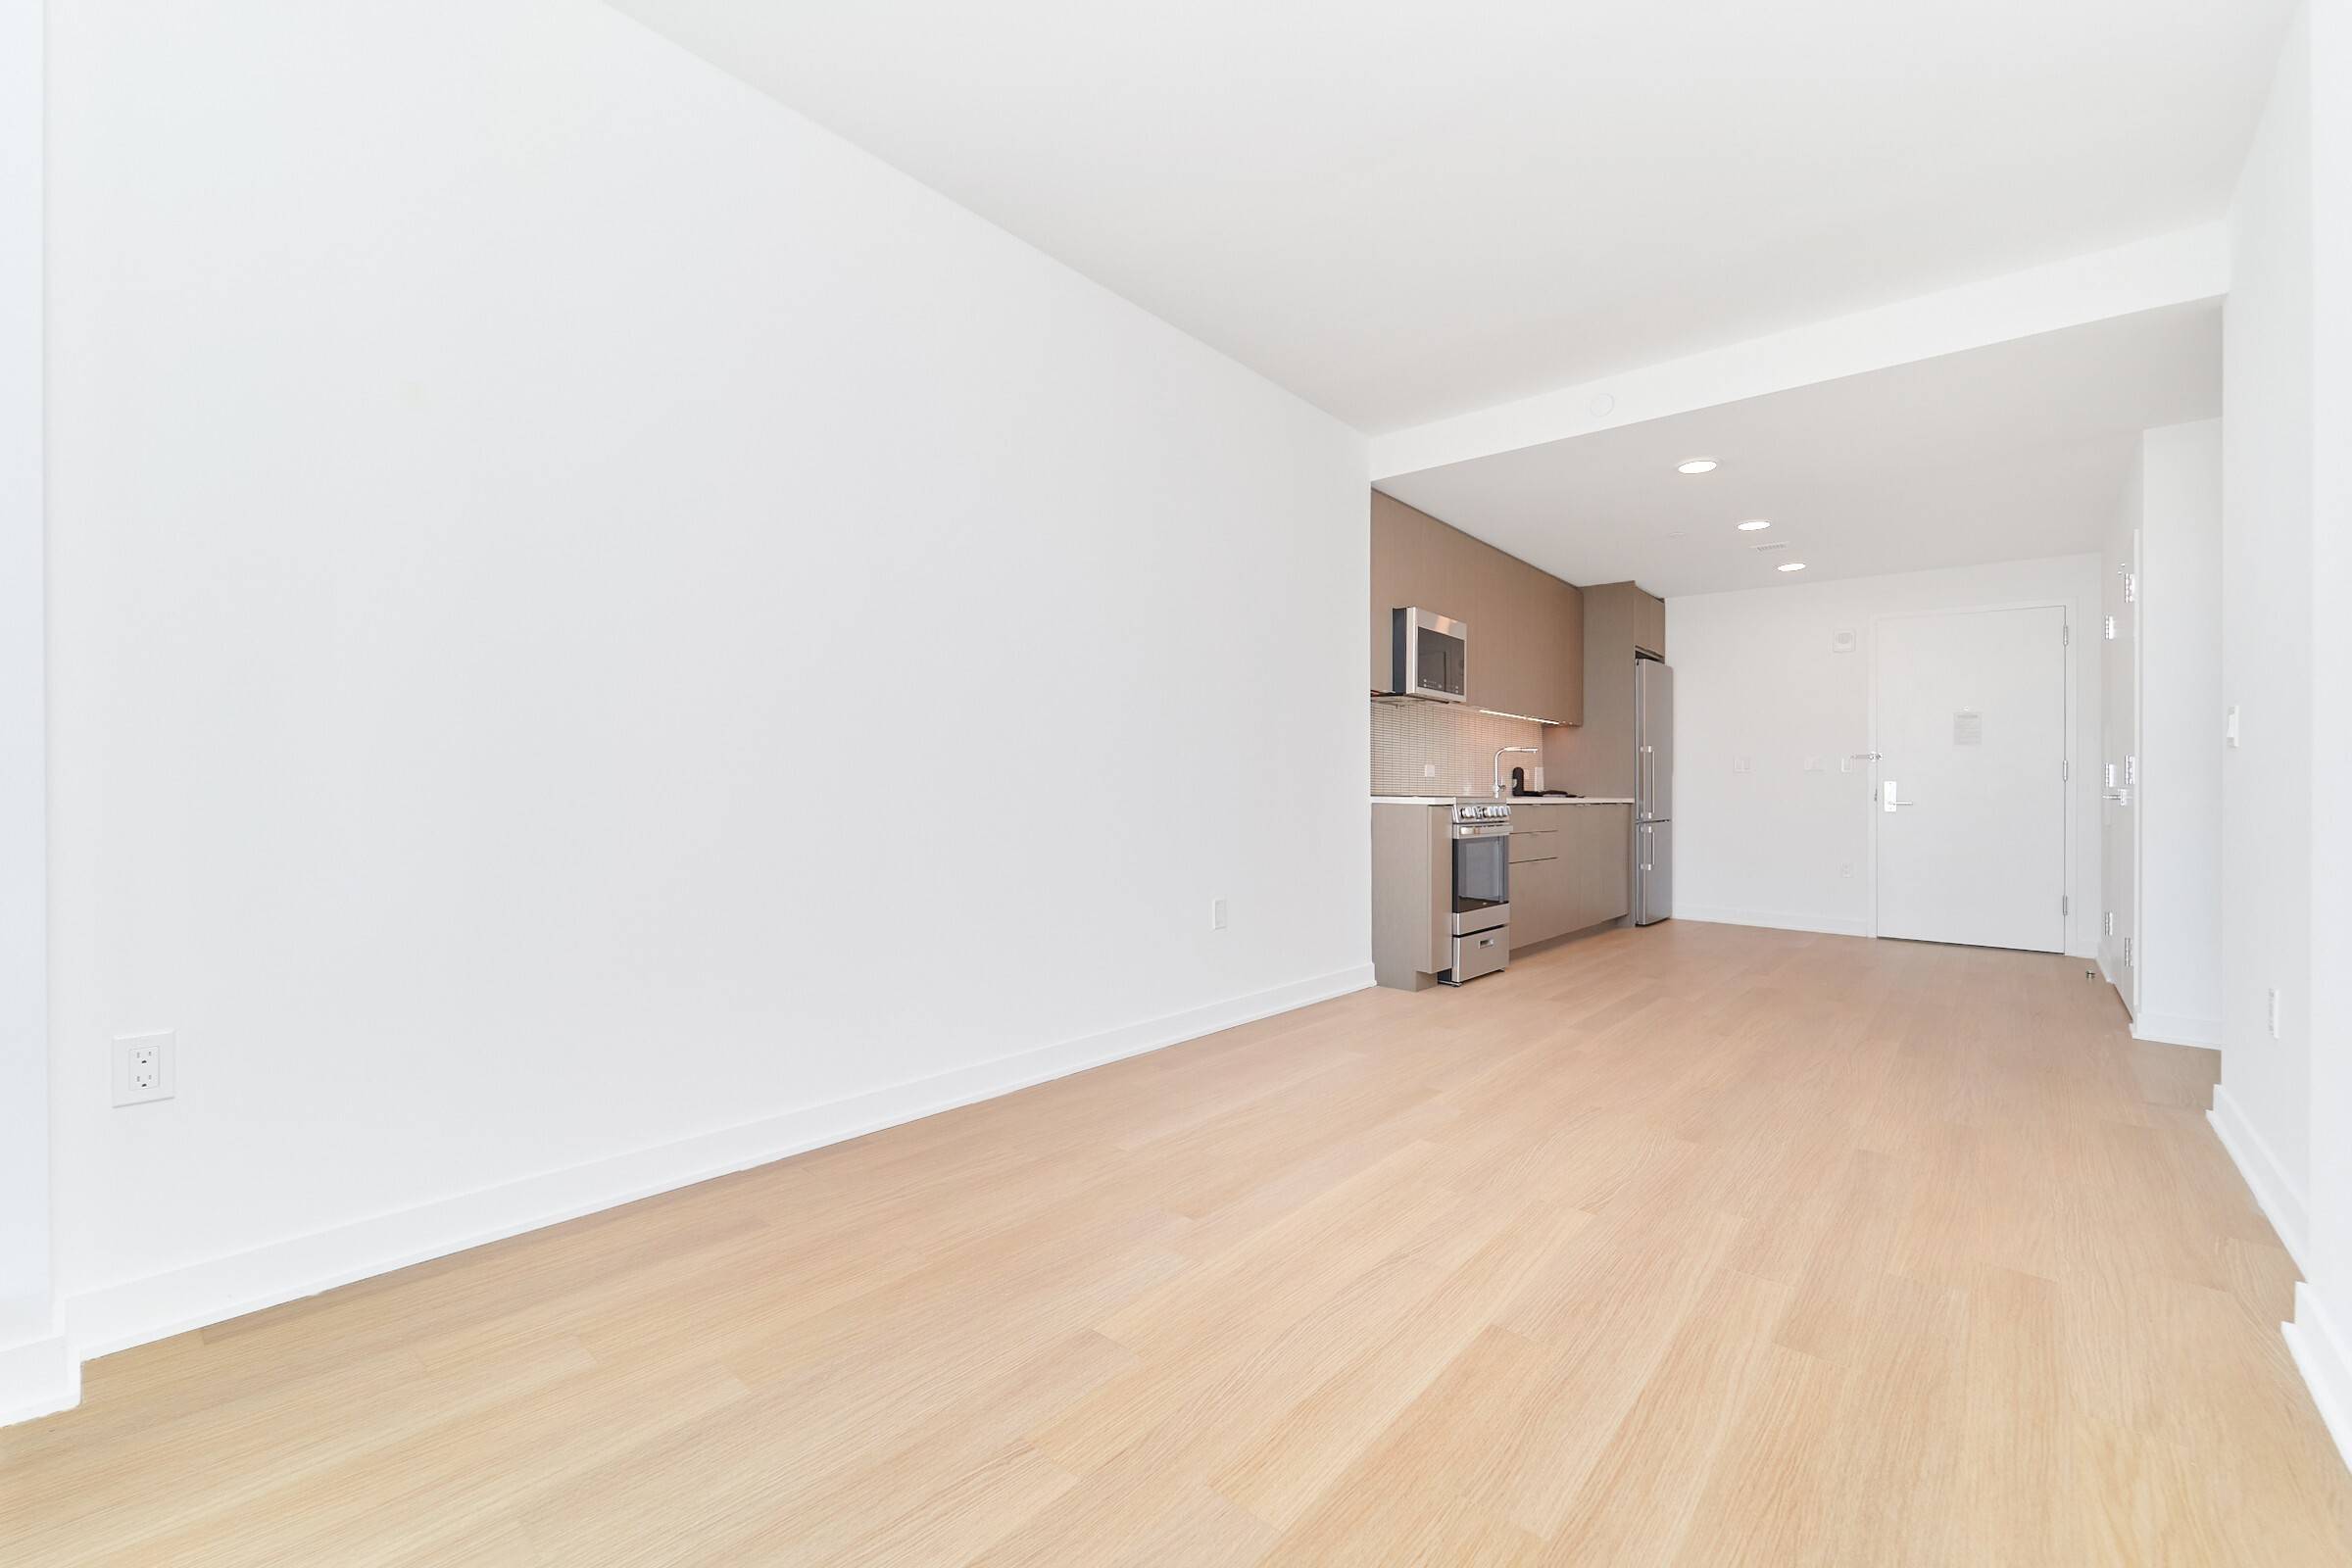 Unparalleled North facing 1 bedroom home with panoramic views of the Manhattan skyline in one of the most desirable luxury buildings in the Prospect Height area.